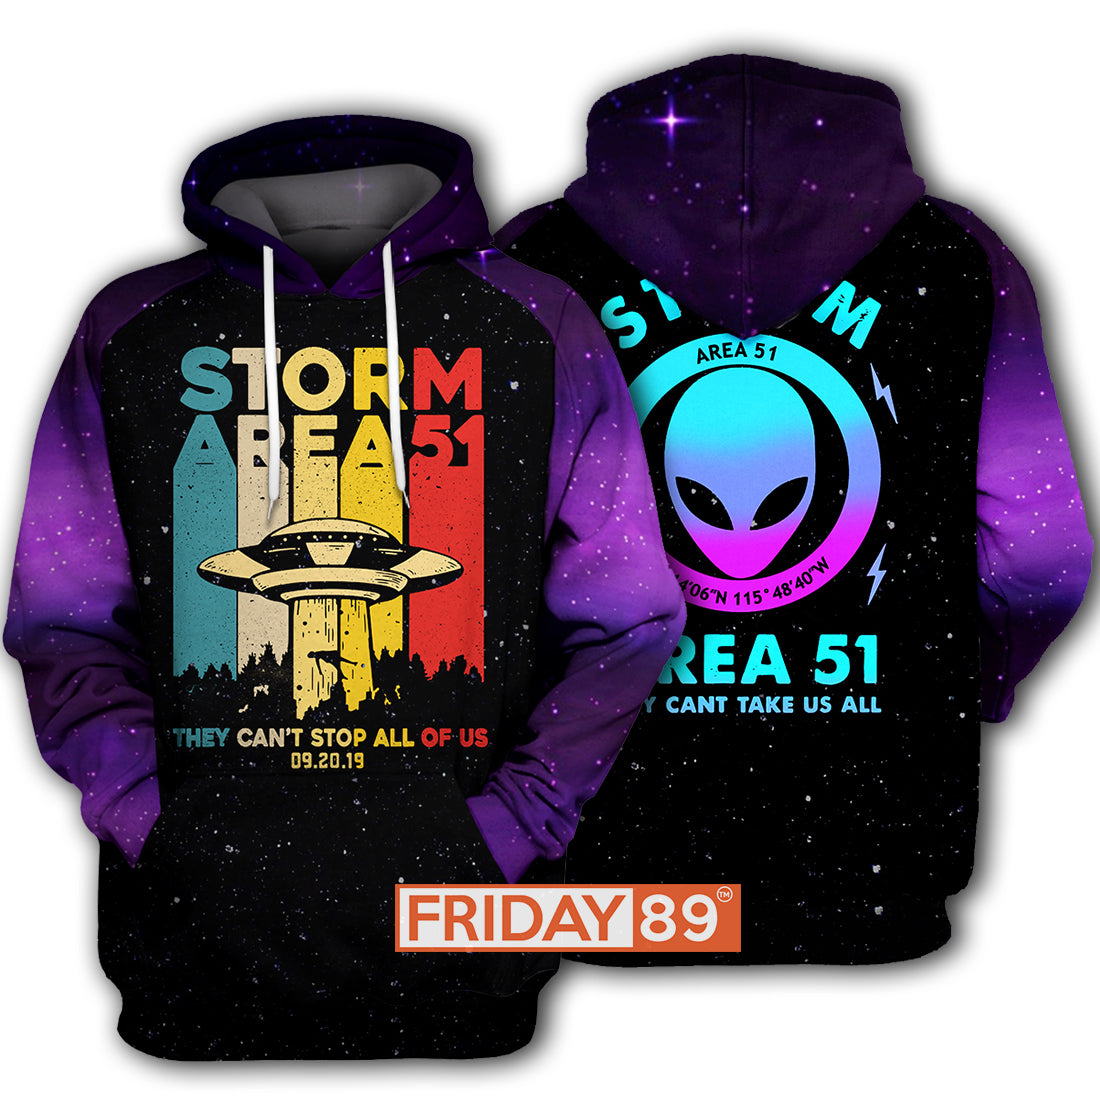 Unifinz Alien Hoodie Storm Area 51 They Can't Stop Us T-shirt High Quality Alien Shirt Sweater Tank 2022